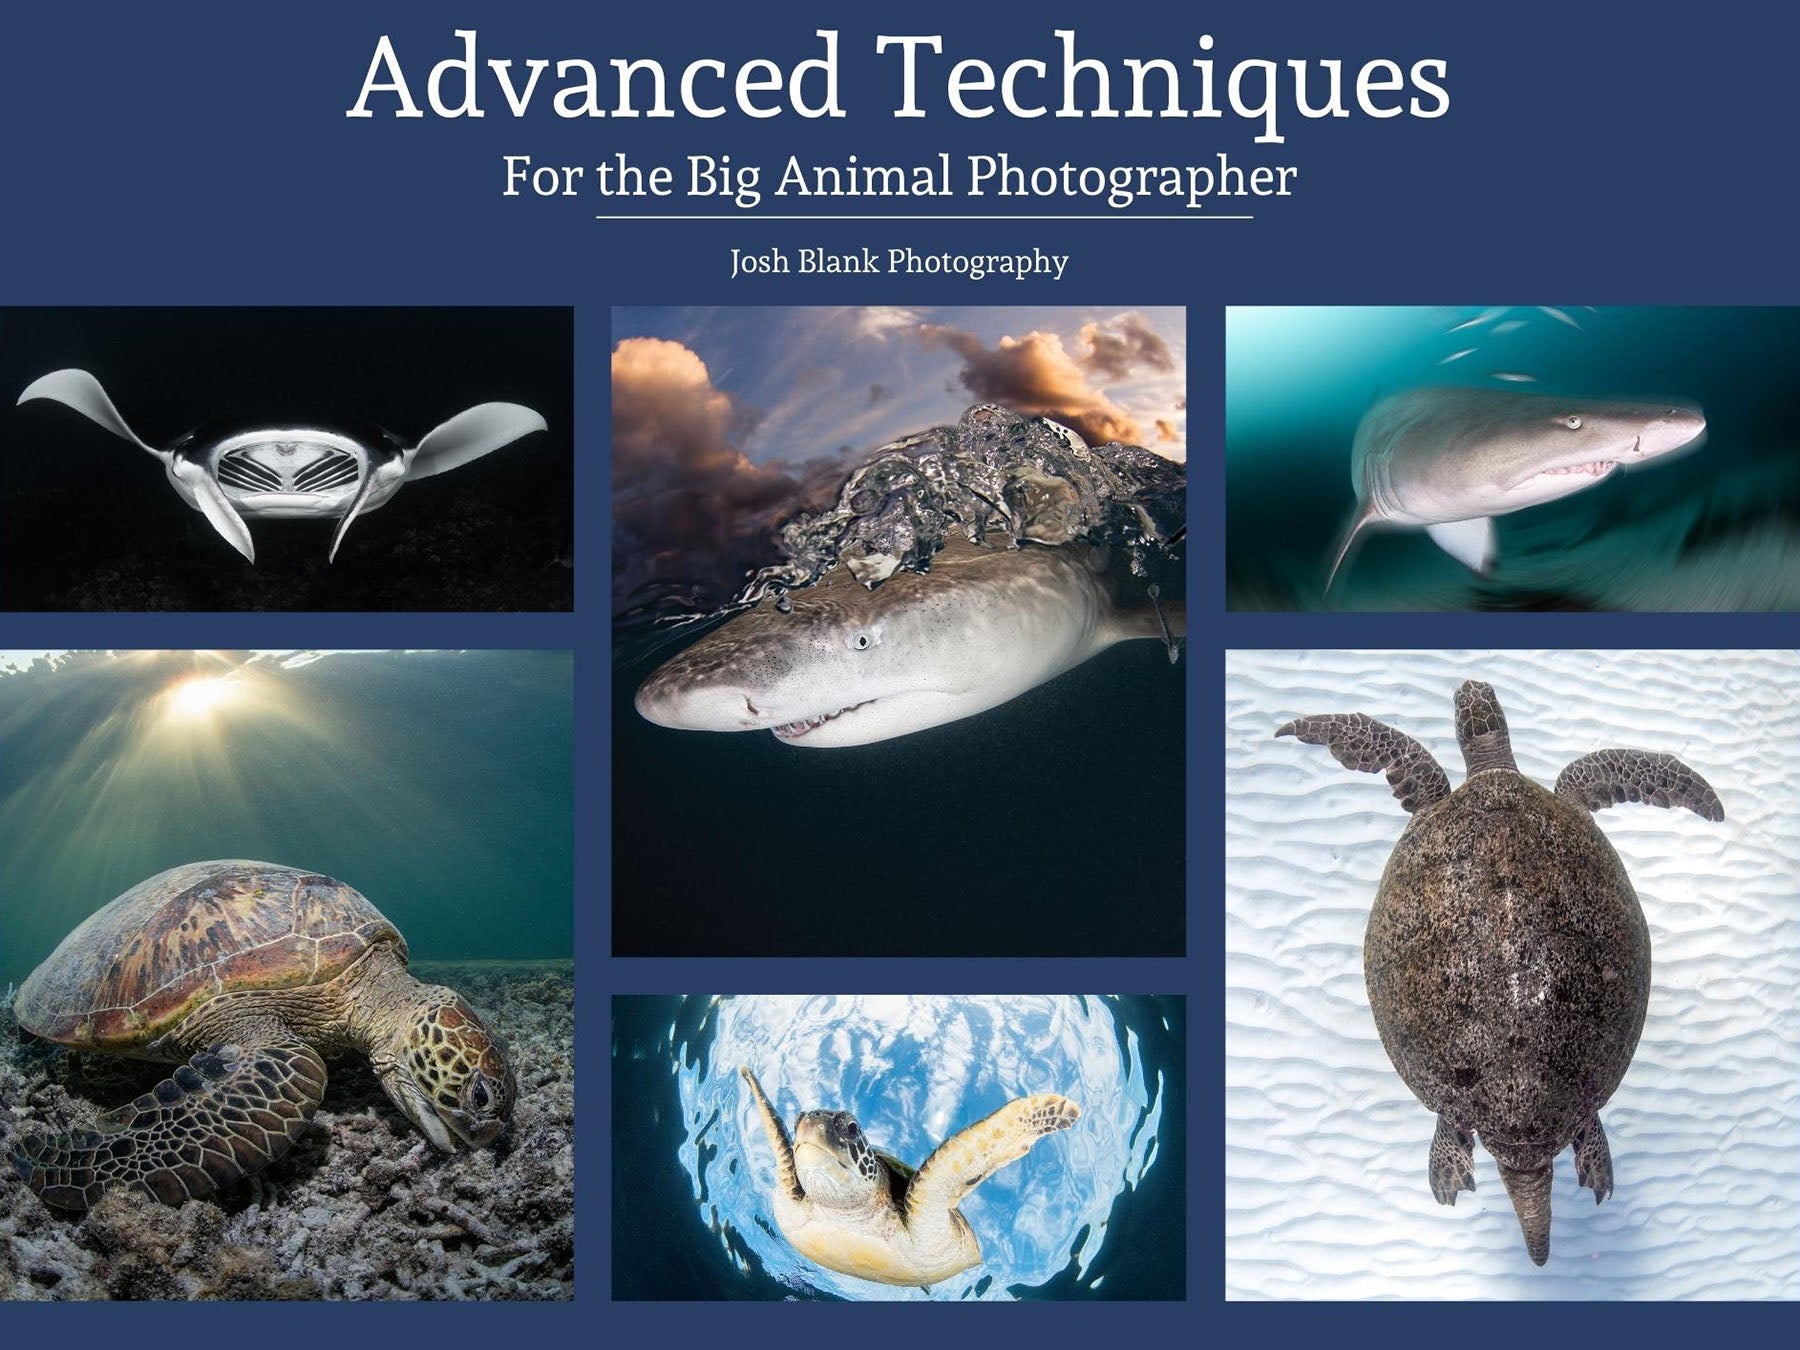 Book Review: Advanced Techniques for the Big Animal Photographer